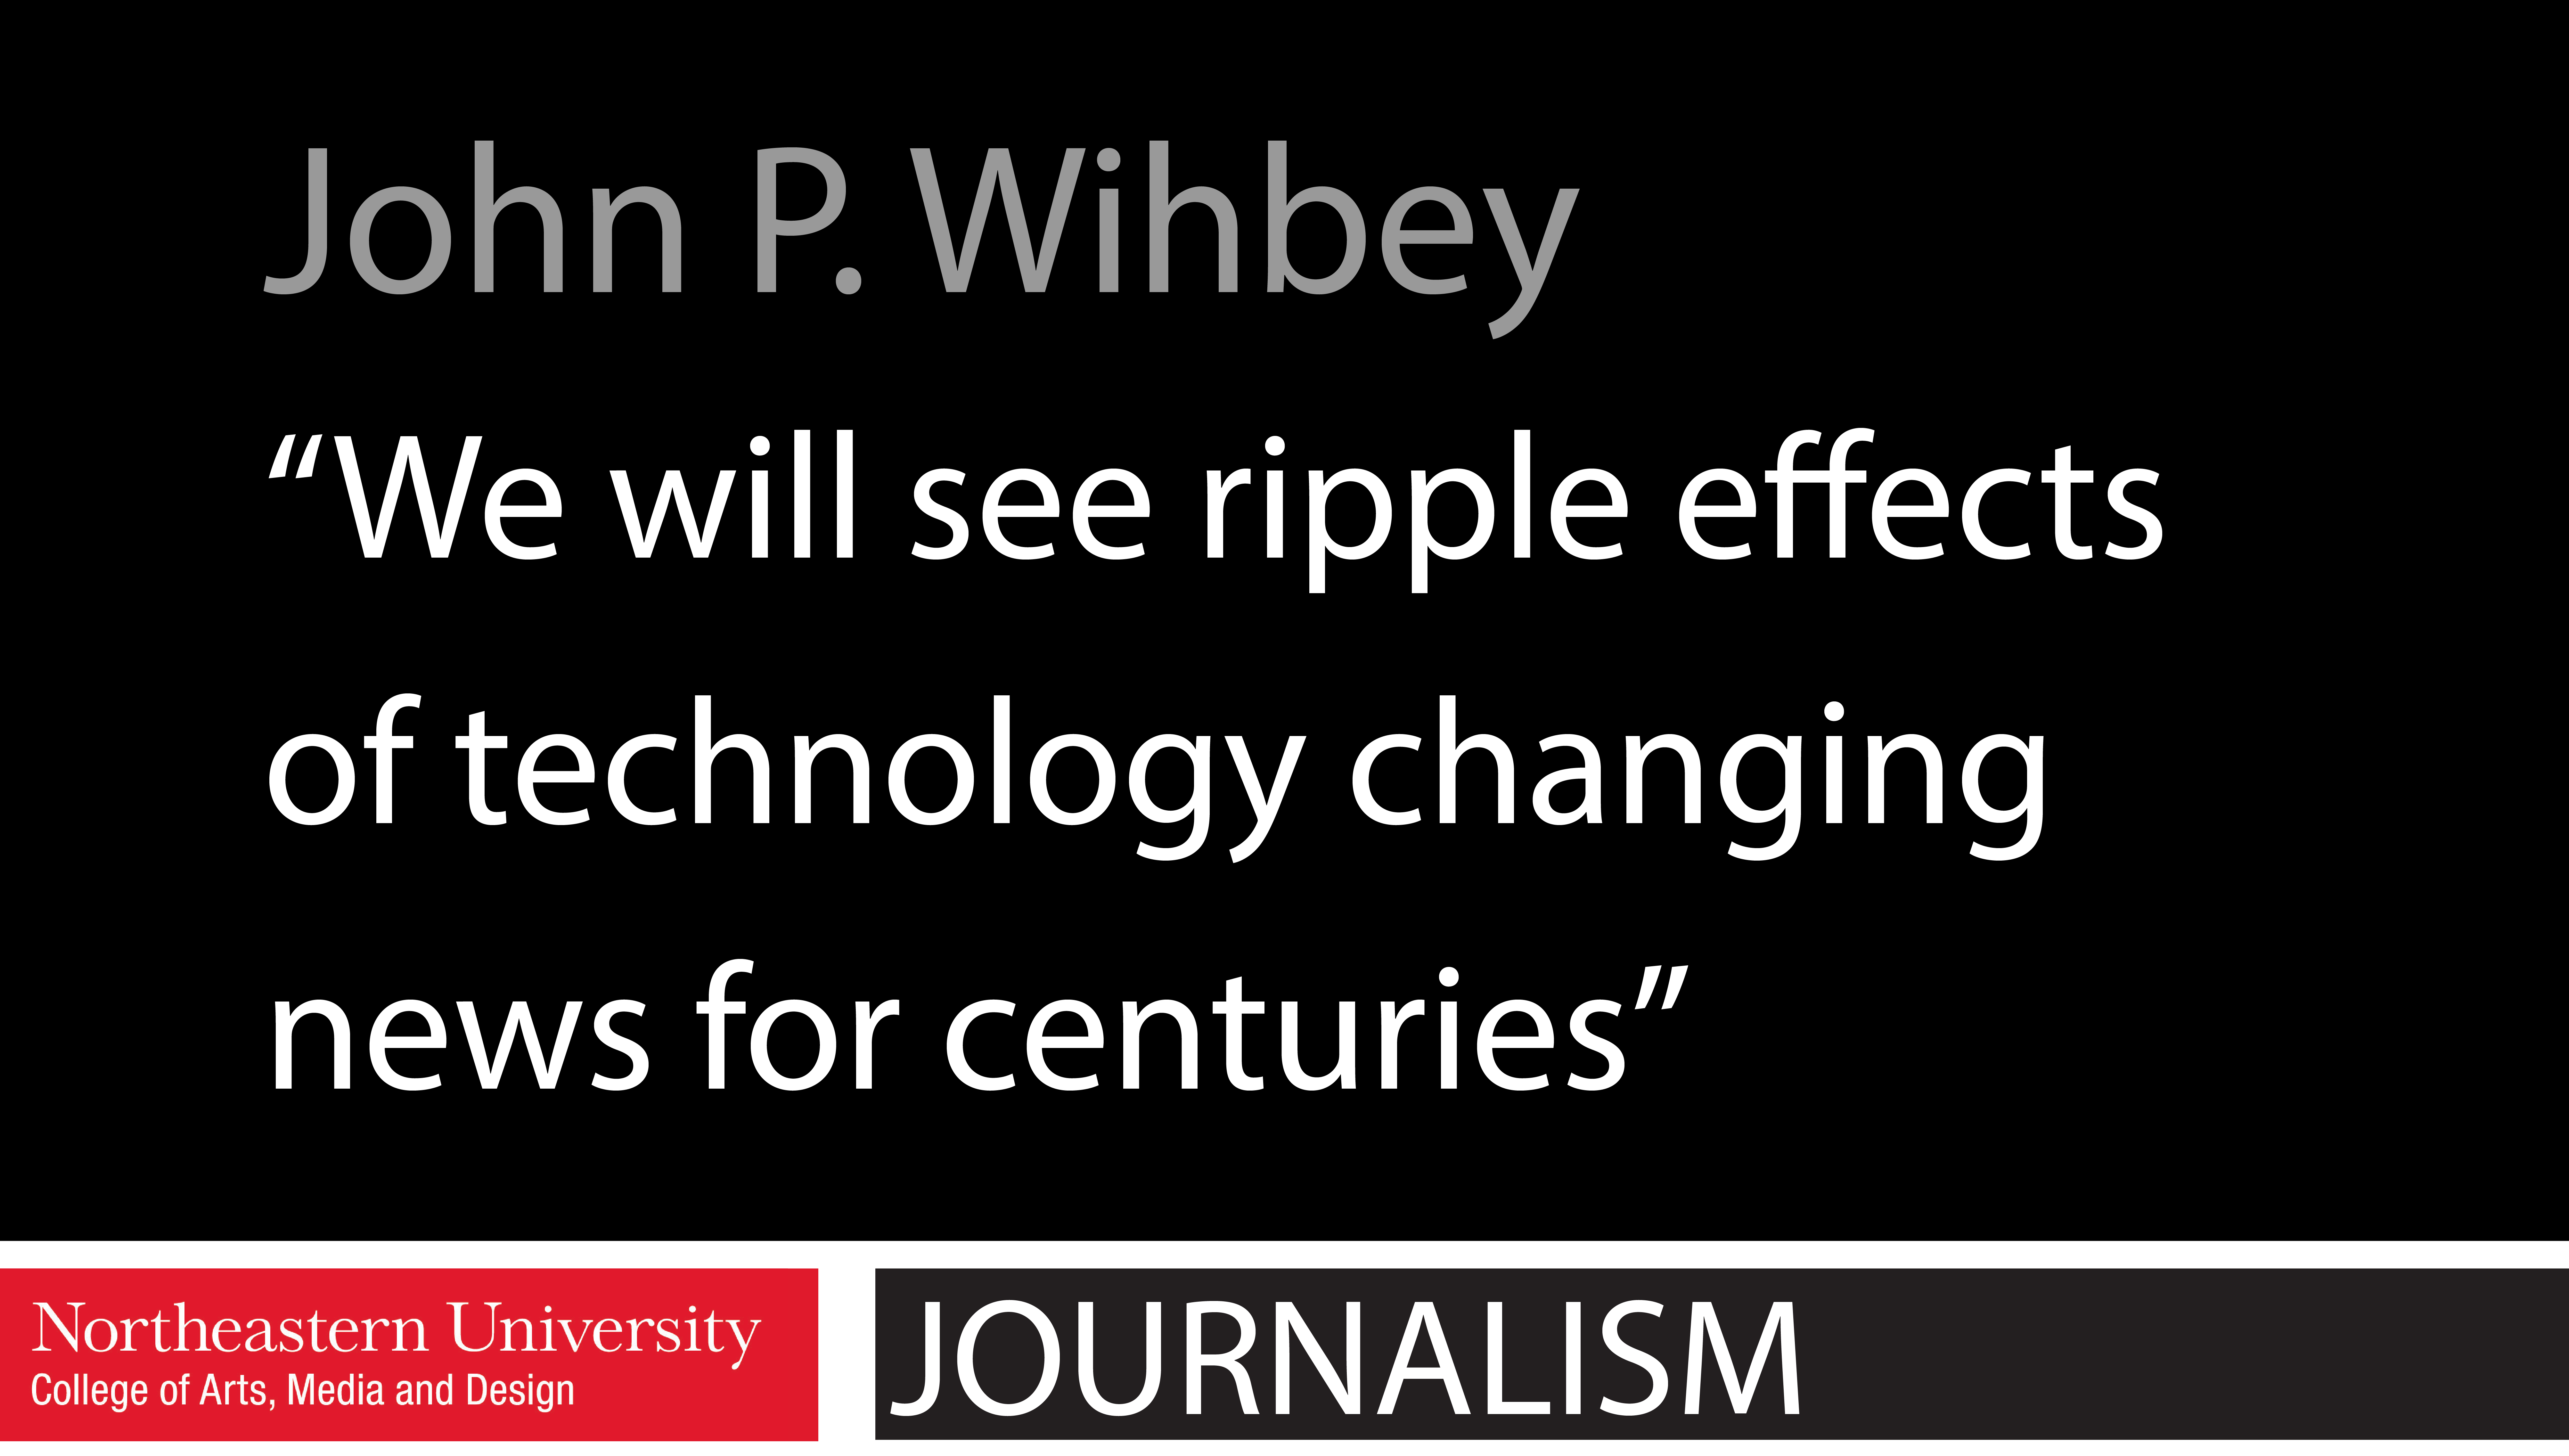 “We will see ripple effects of technology changing news for centuries”